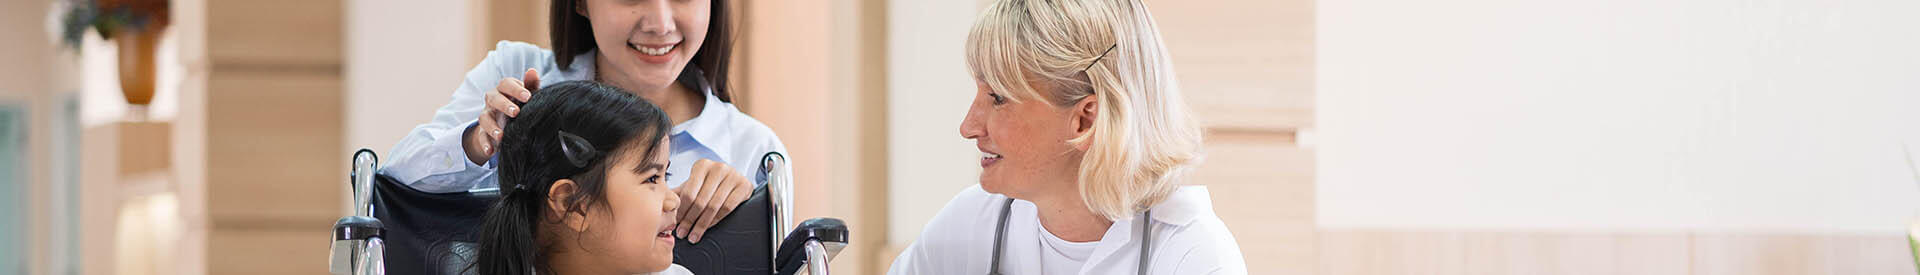 female doctor talking to a pediatric patient in a wheelchair